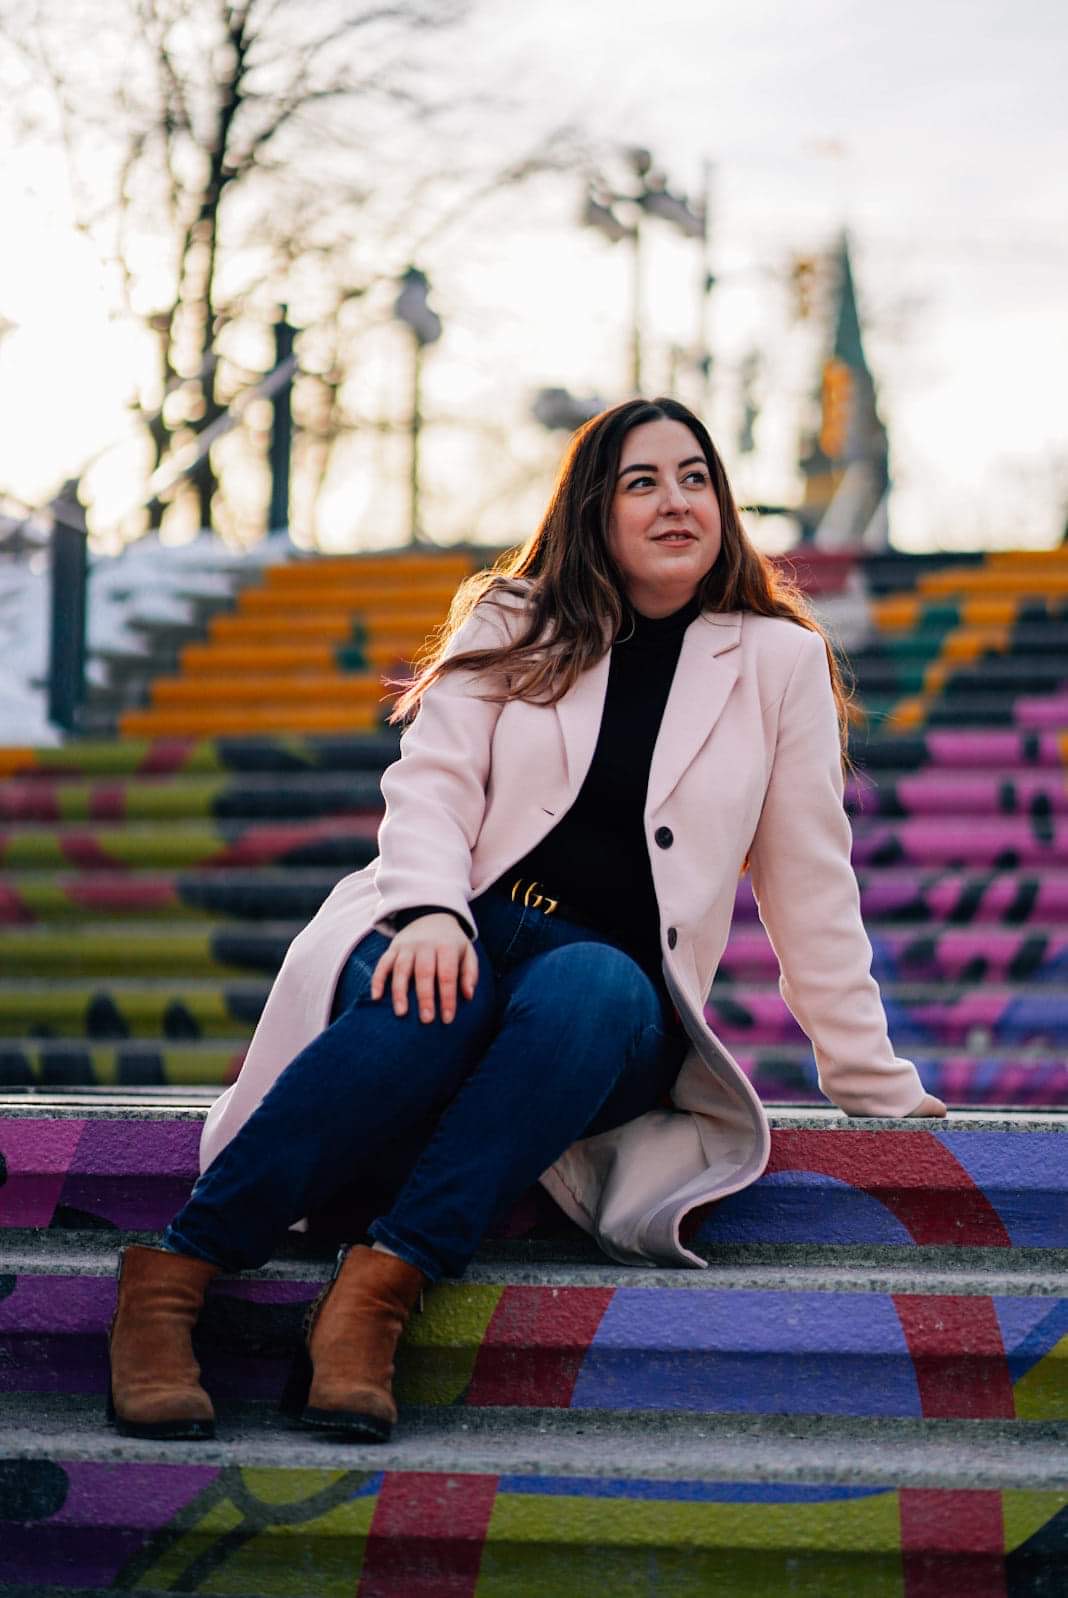 Georgia is sitting on an outdoor painted staircase in a pink coat